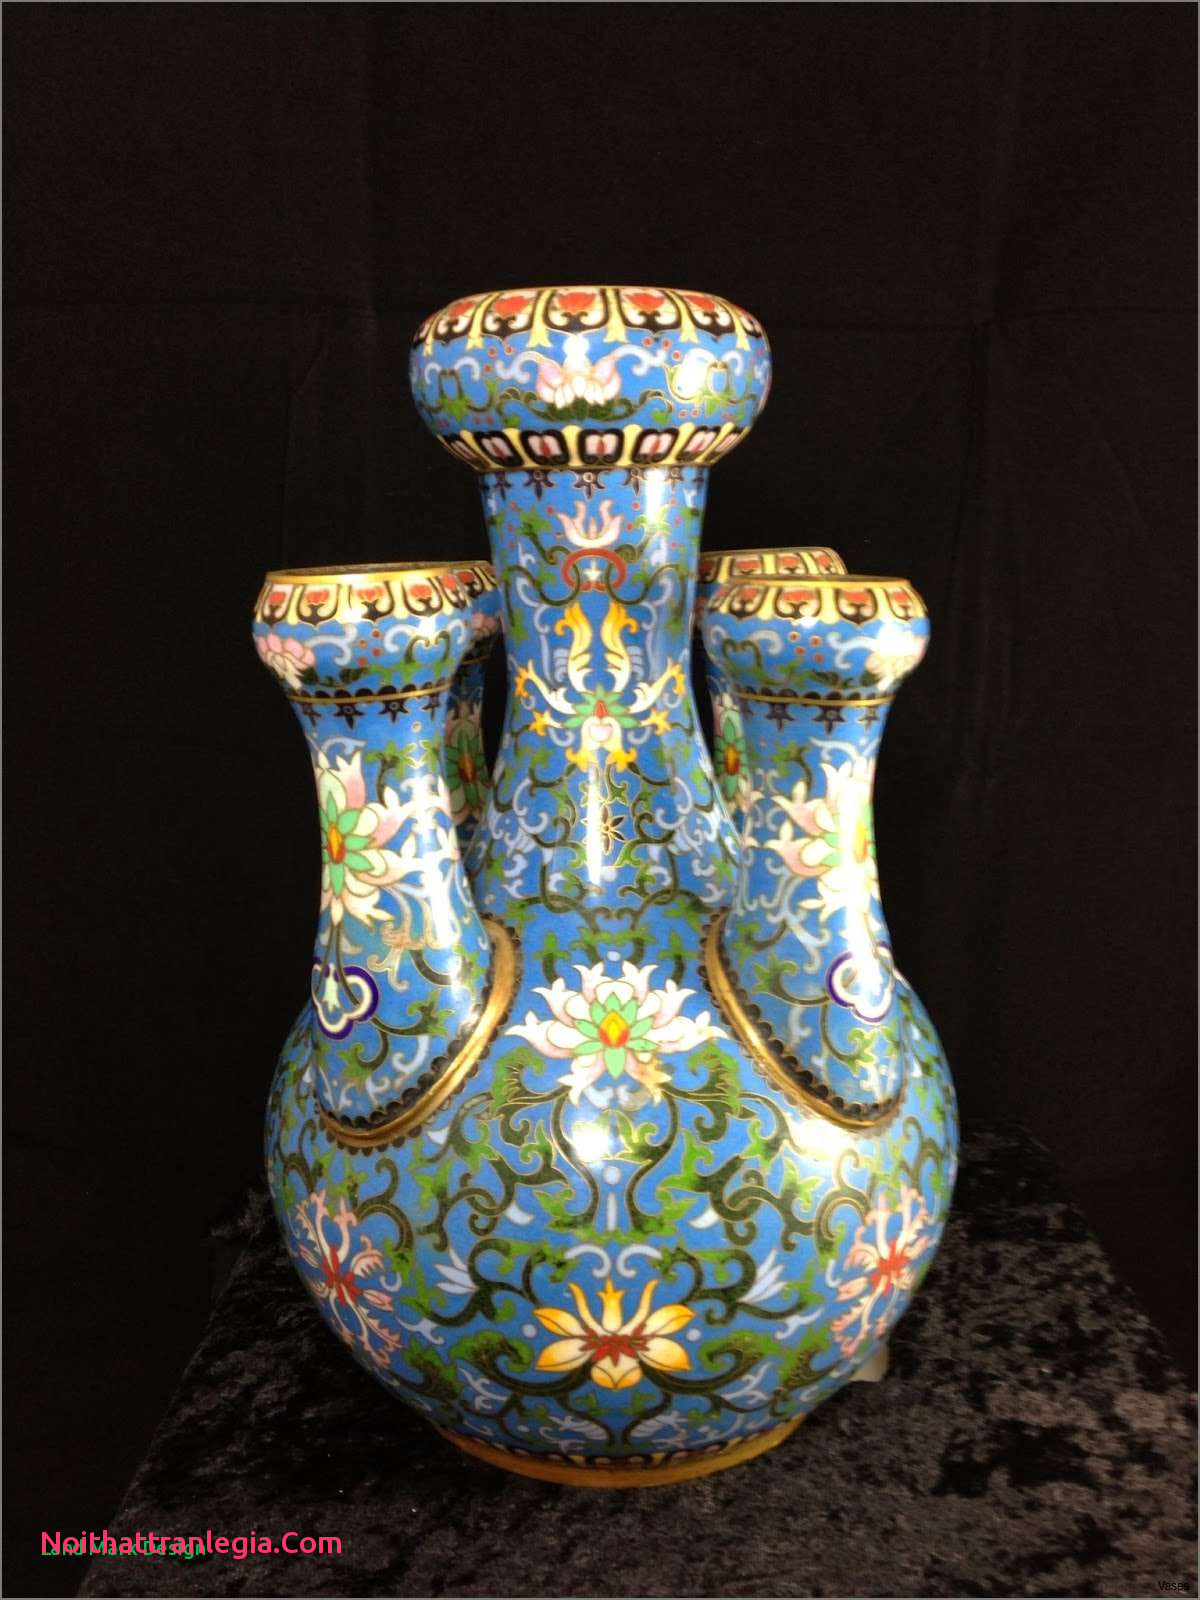 18 Spectacular Large oriental Vases 2024 free download large oriental vases of 20 chinese antique vase noithattranlegia vases design intended for 213 1h vases antique asian the increased trade of chinese ware during 16th century has significantl